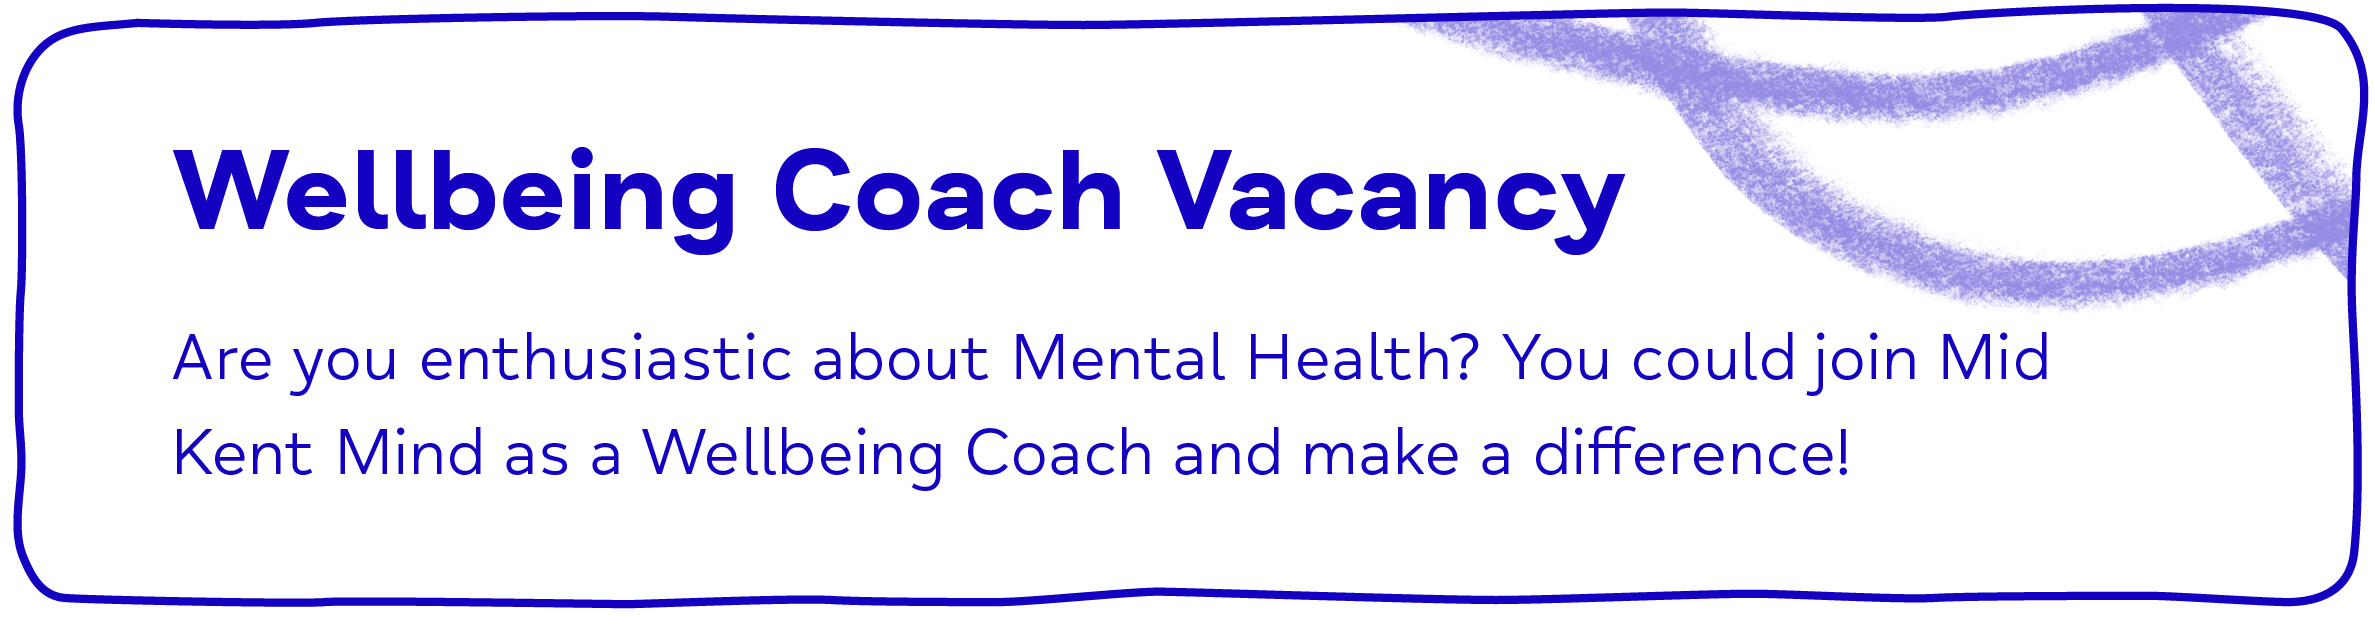 Wellbeing Coach Vacancy. Are you enthusiastic about Mental Health? You could join Mid Kent Mind as a Wellbeing Coach and make a difference!